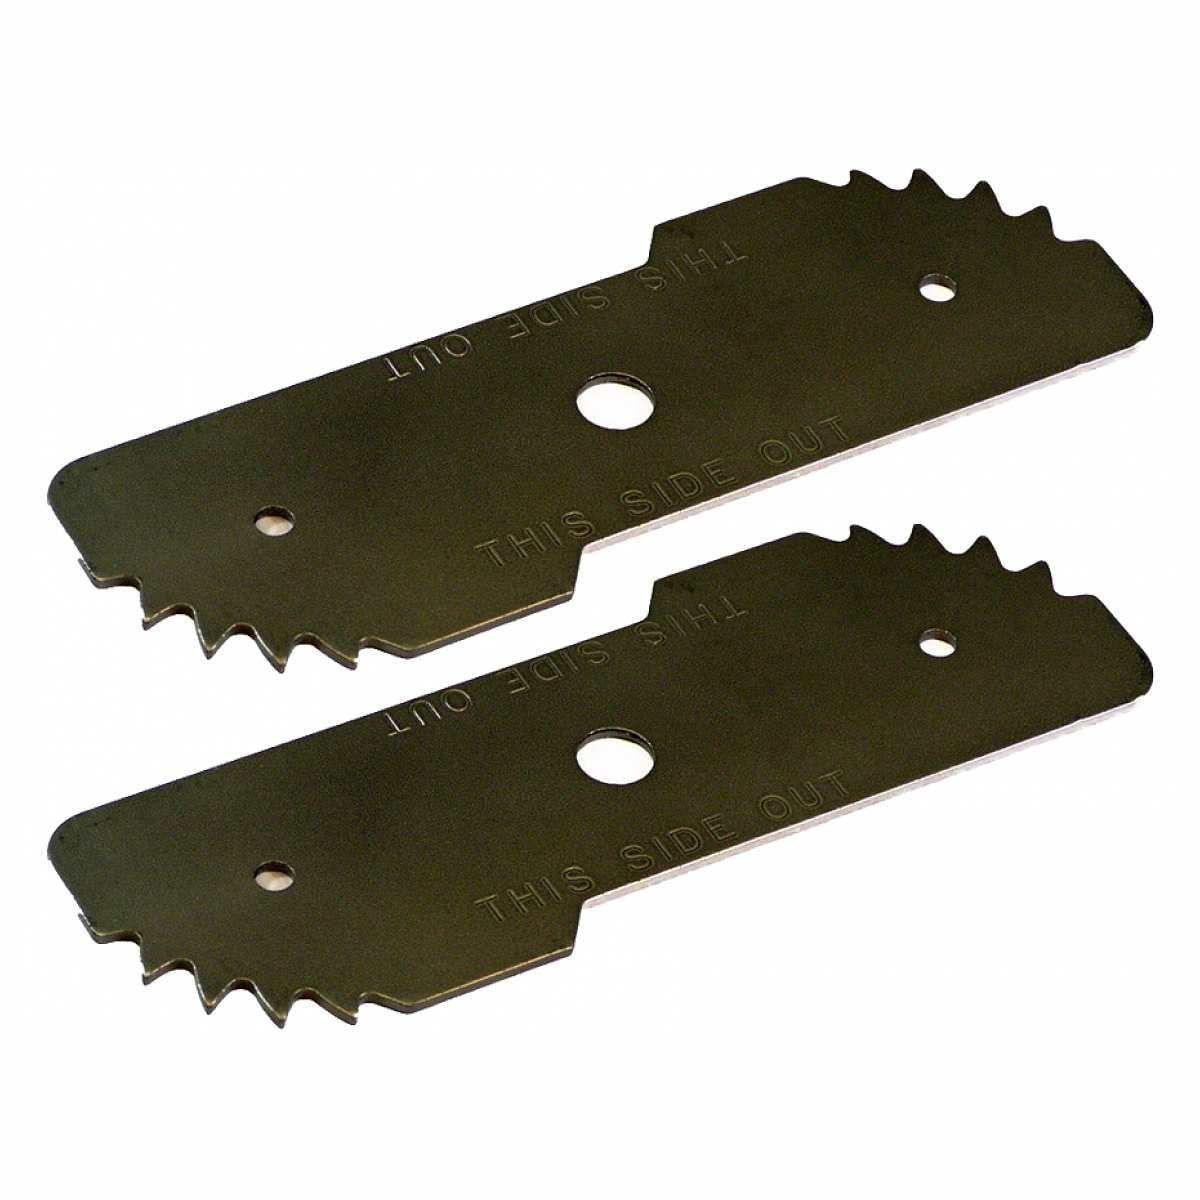 2PCS Edger Blade Electric Grinding Machine Blades Heavy Duty Lawn Edge  Blades Replacements Fit for Black /Decker Edge - AliExpress